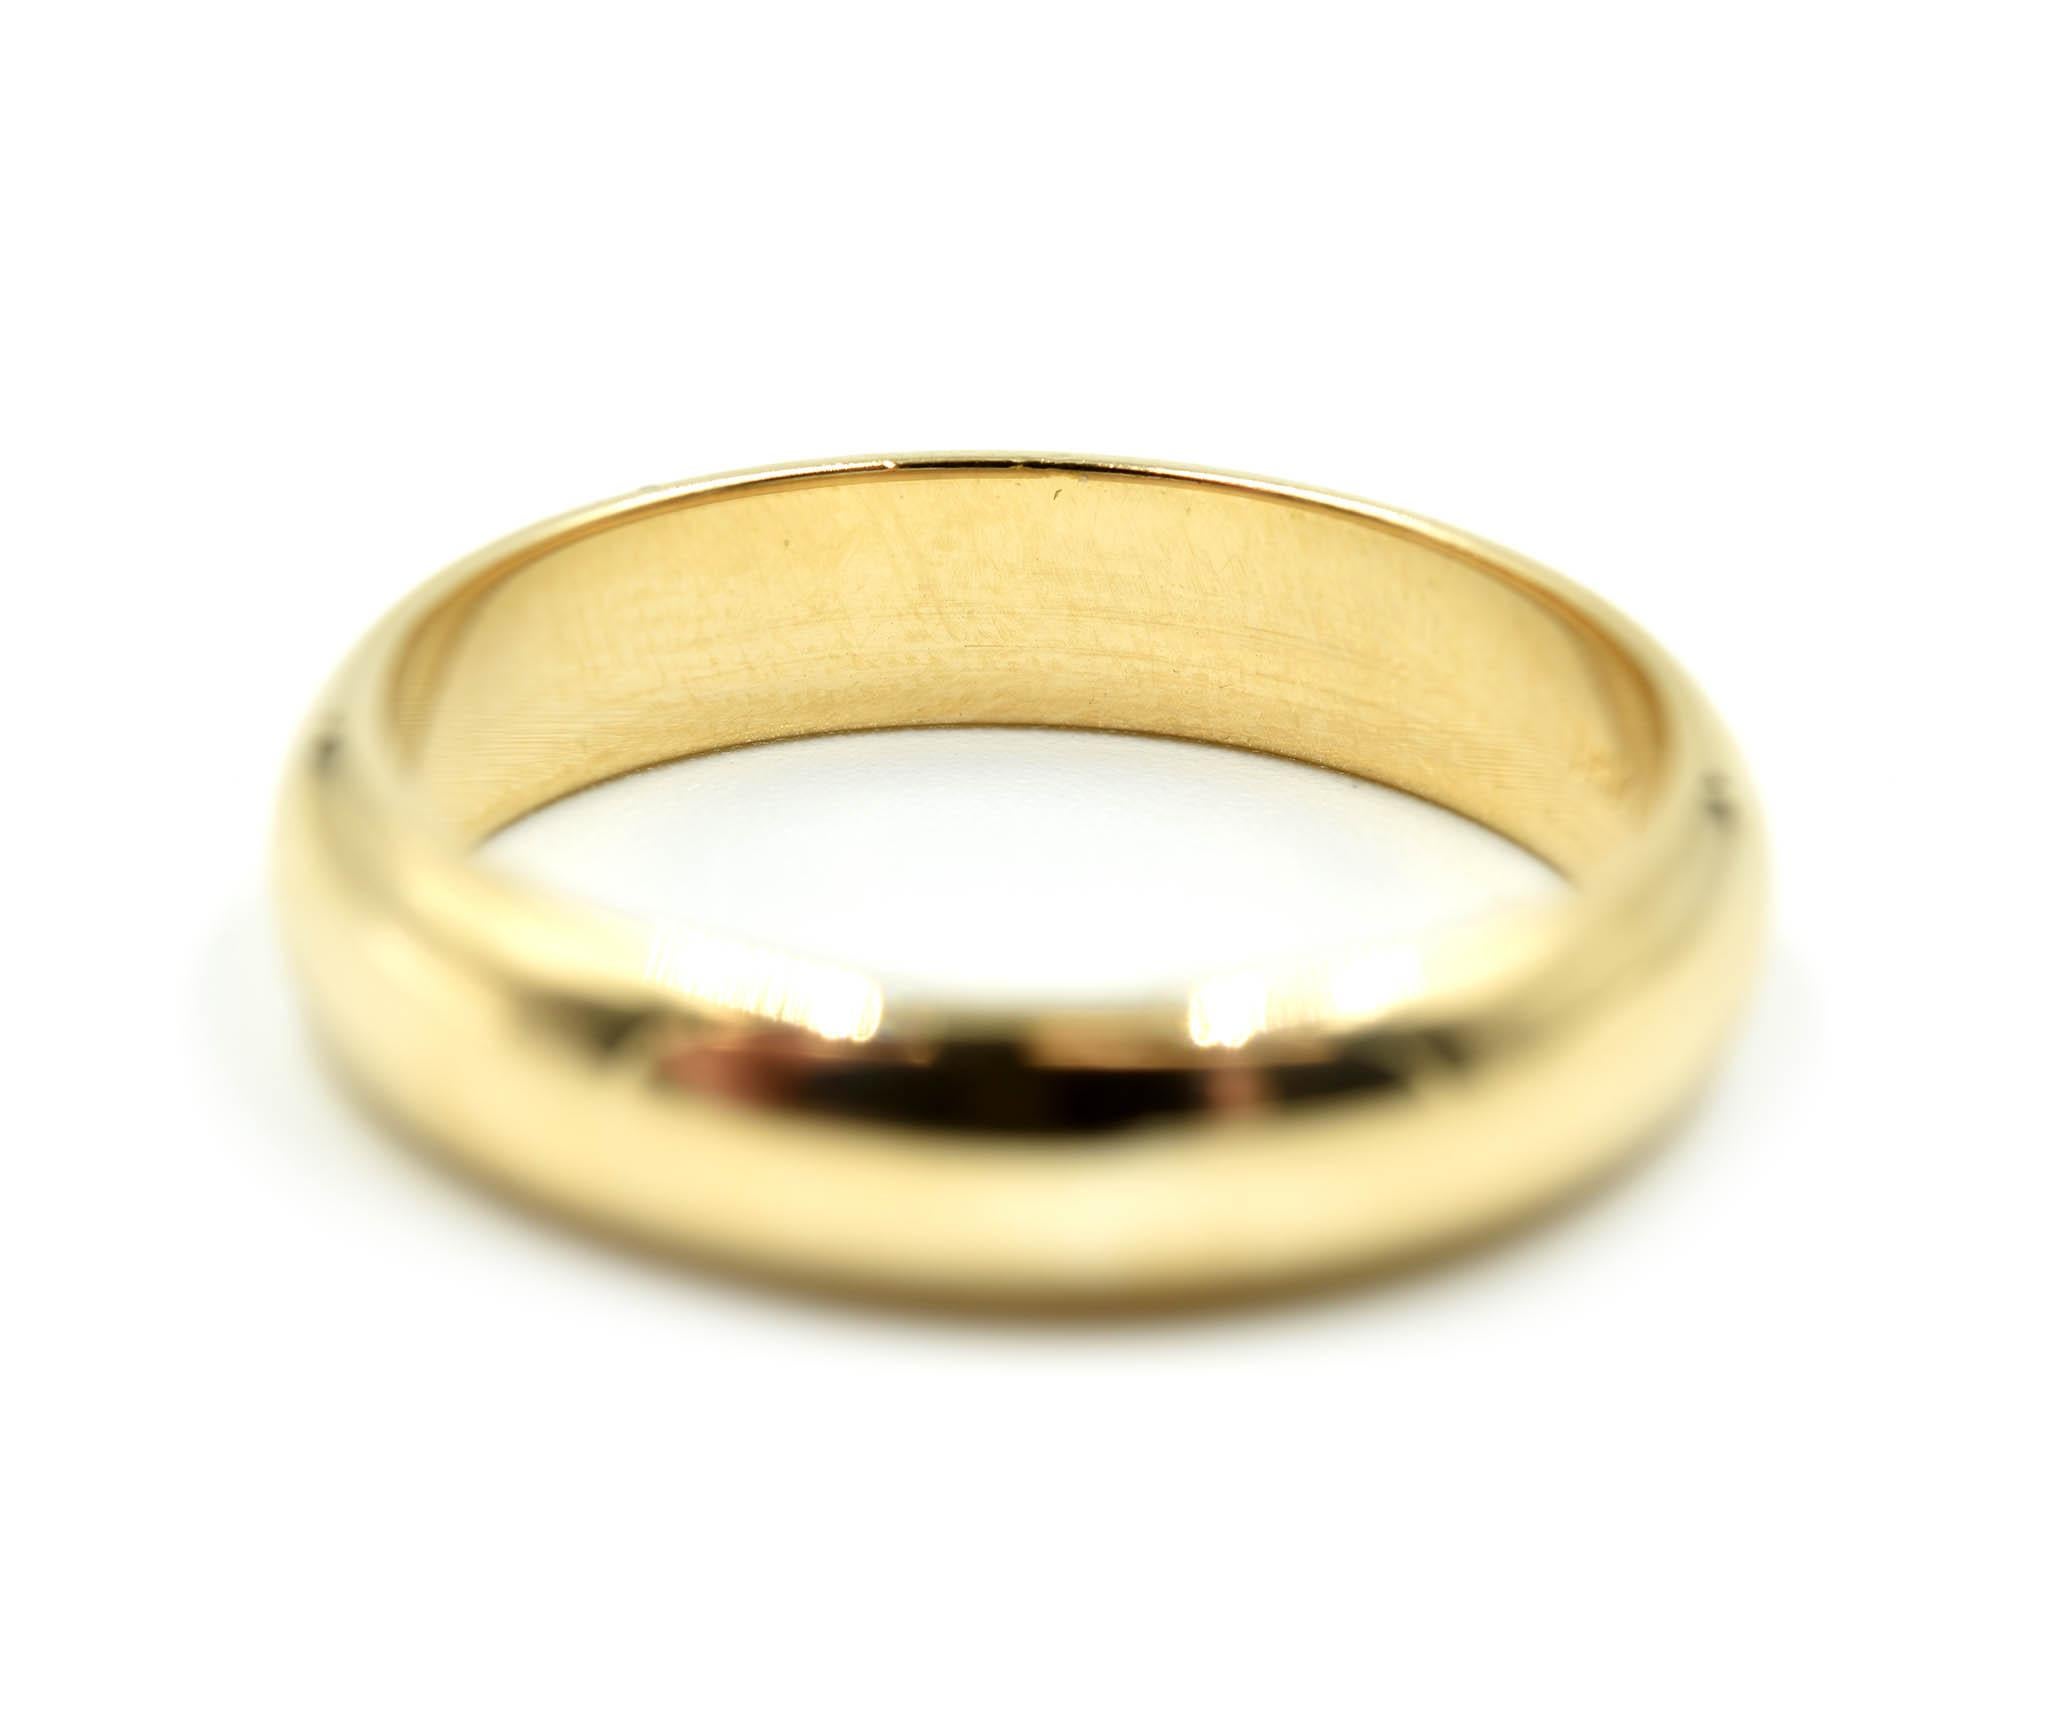 Designer: custom design
Material: 14k yellow gold
Dimensions: band is 5mm wide
Ring Size: 9 ½ 
Weight: 6.20 grams
